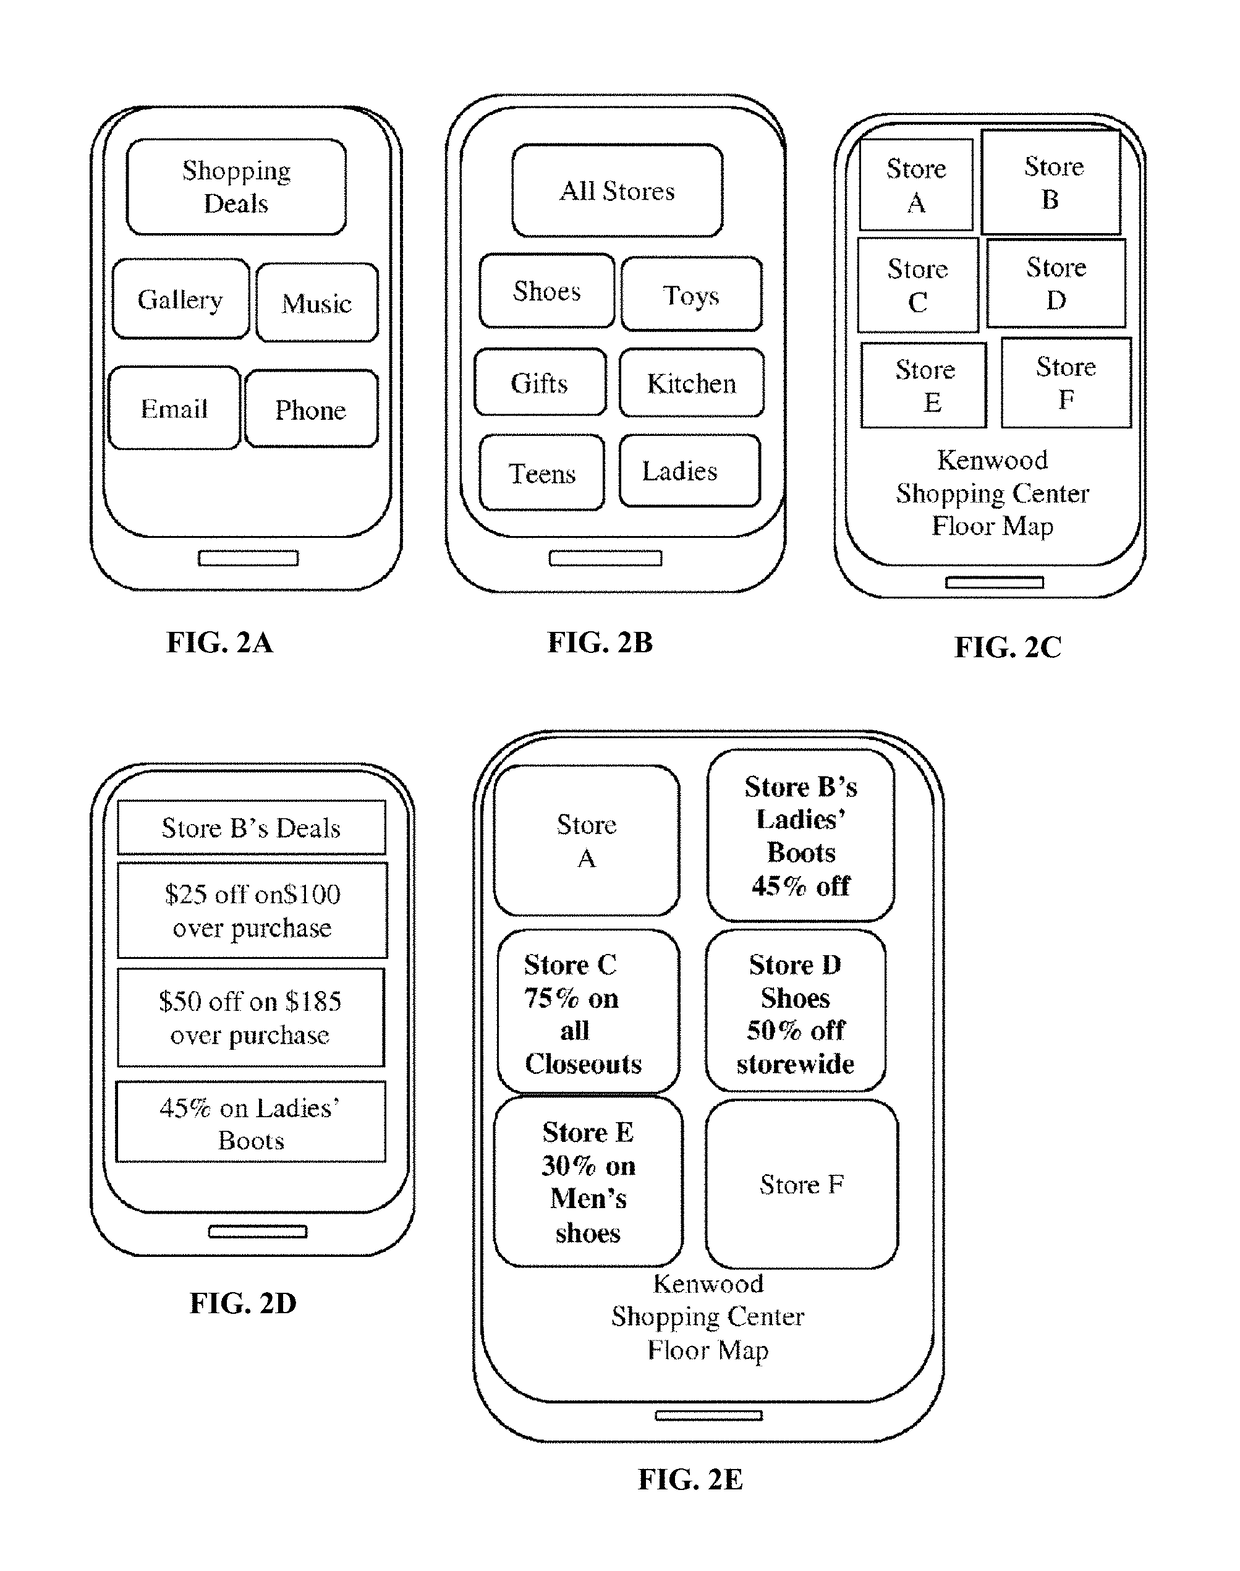 Geo-based information provision, search and access method and software system